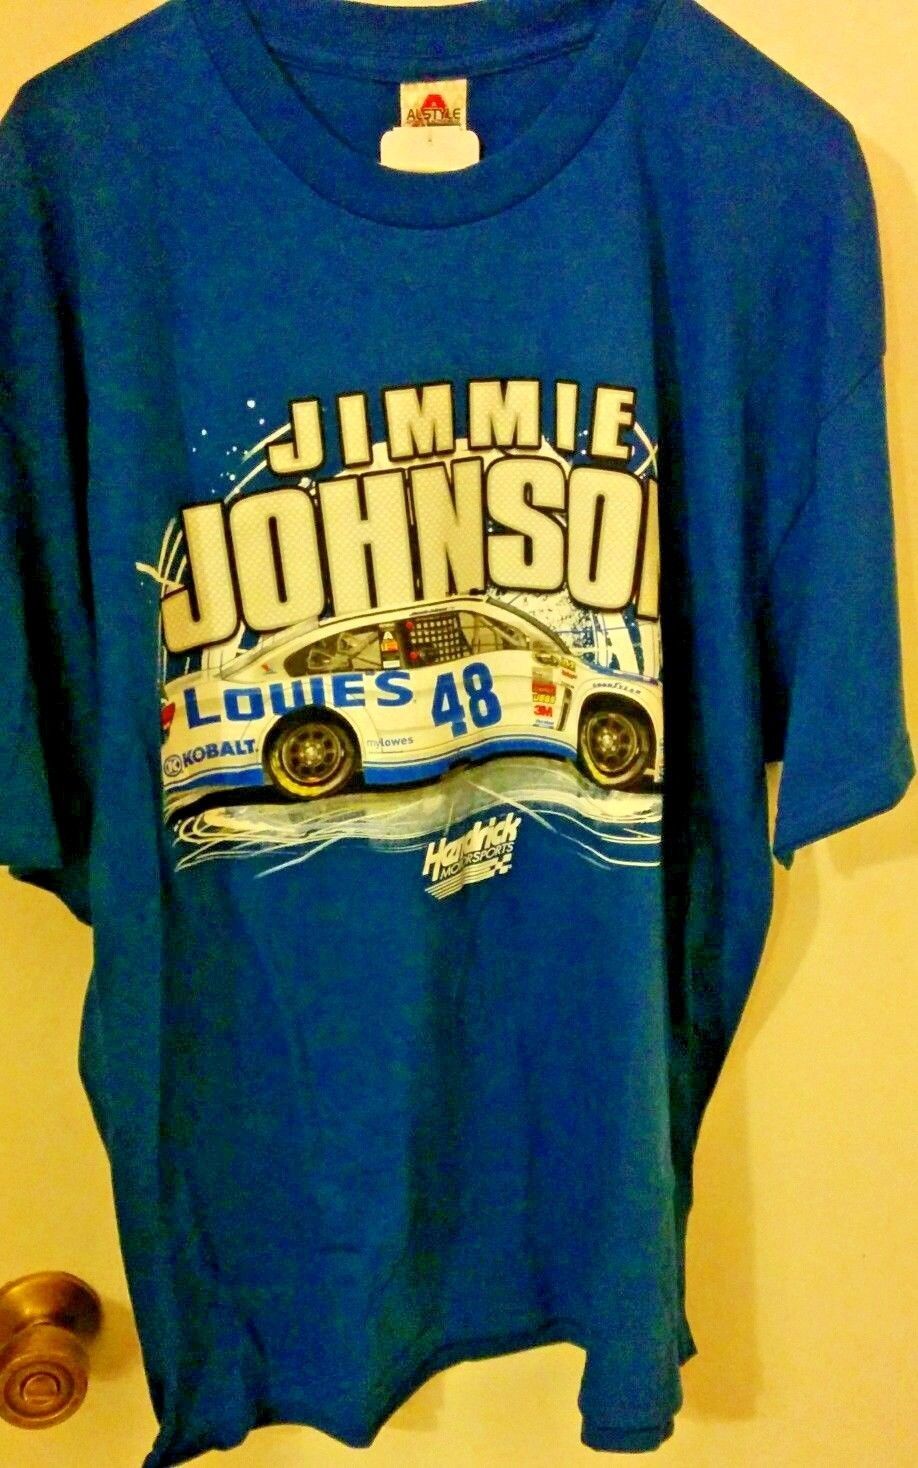 Primary image for NASCAR JIMMIE JOHNSON #48 MEN'S BLUE COTTON T-SHIRT NEW